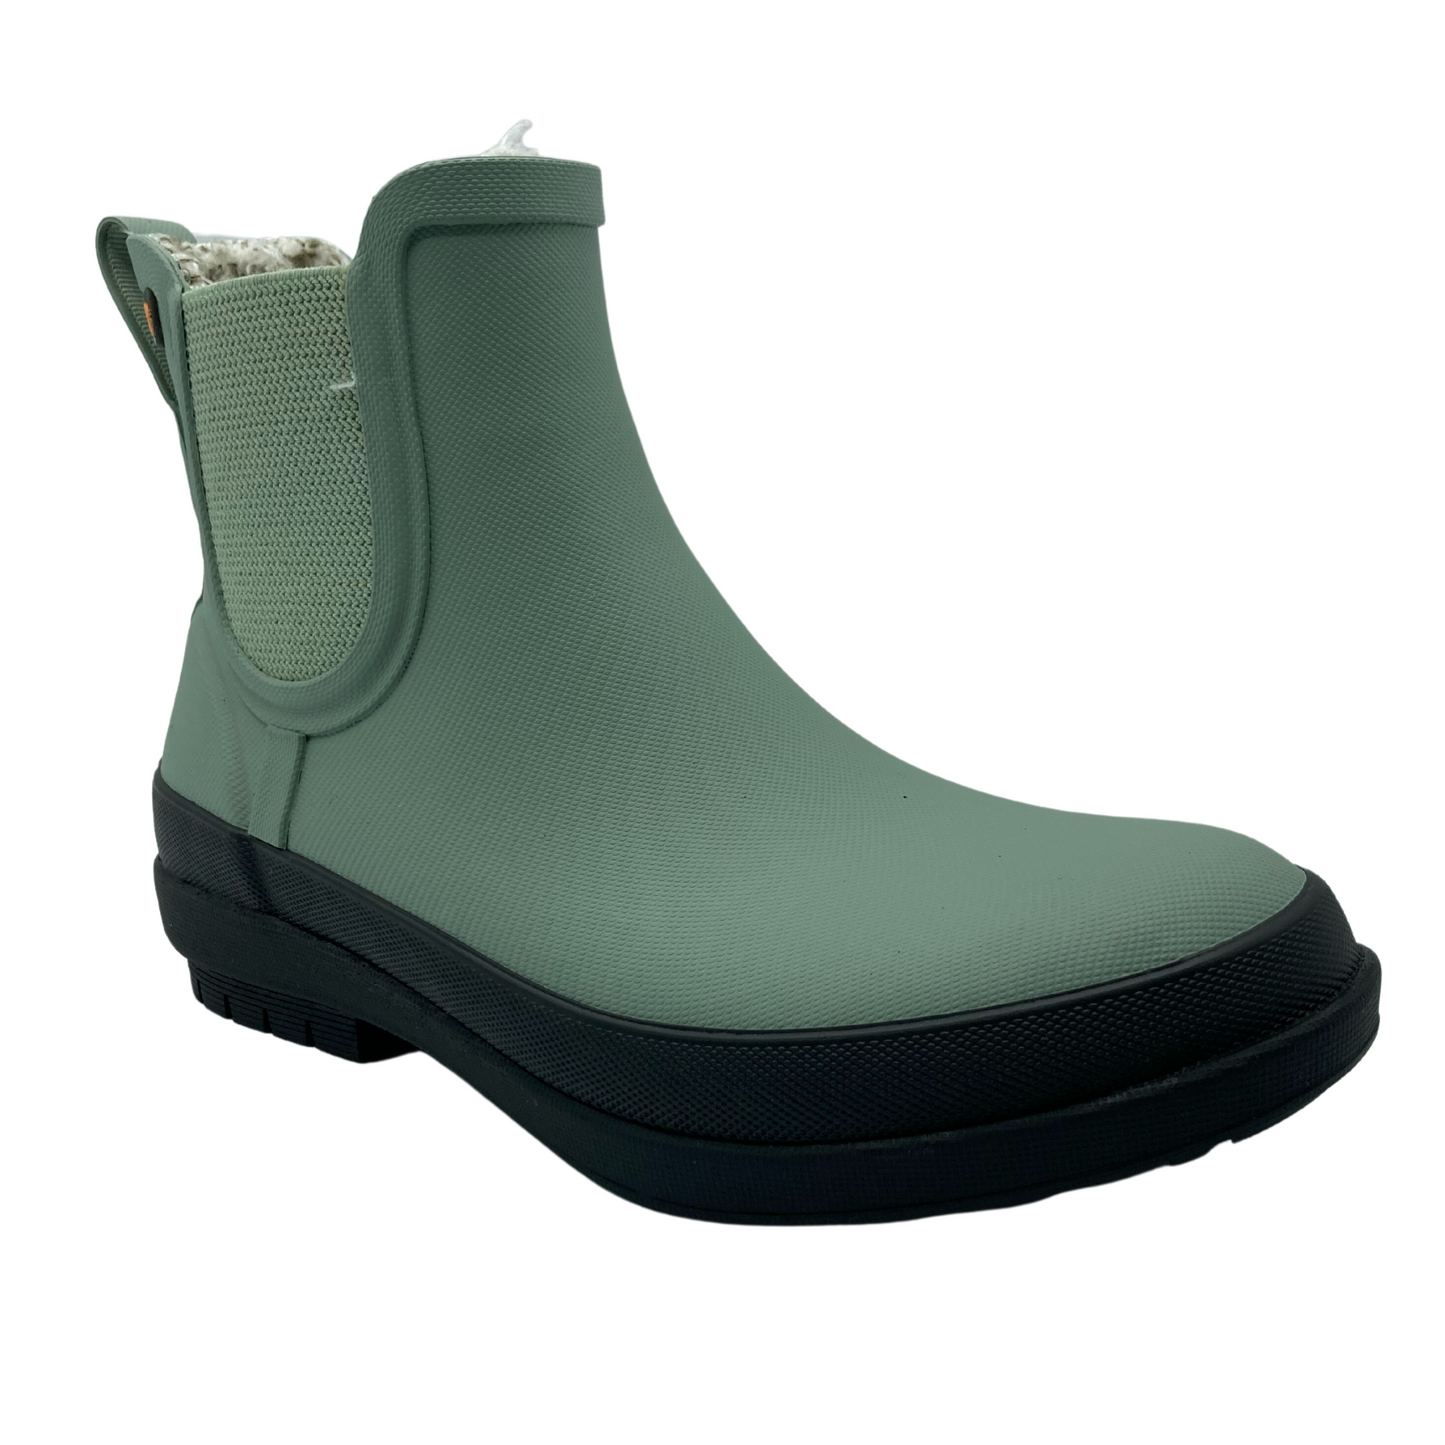 45 degree angled view of jade coloured short rain boot with matching elastic gores and black rubber outsole